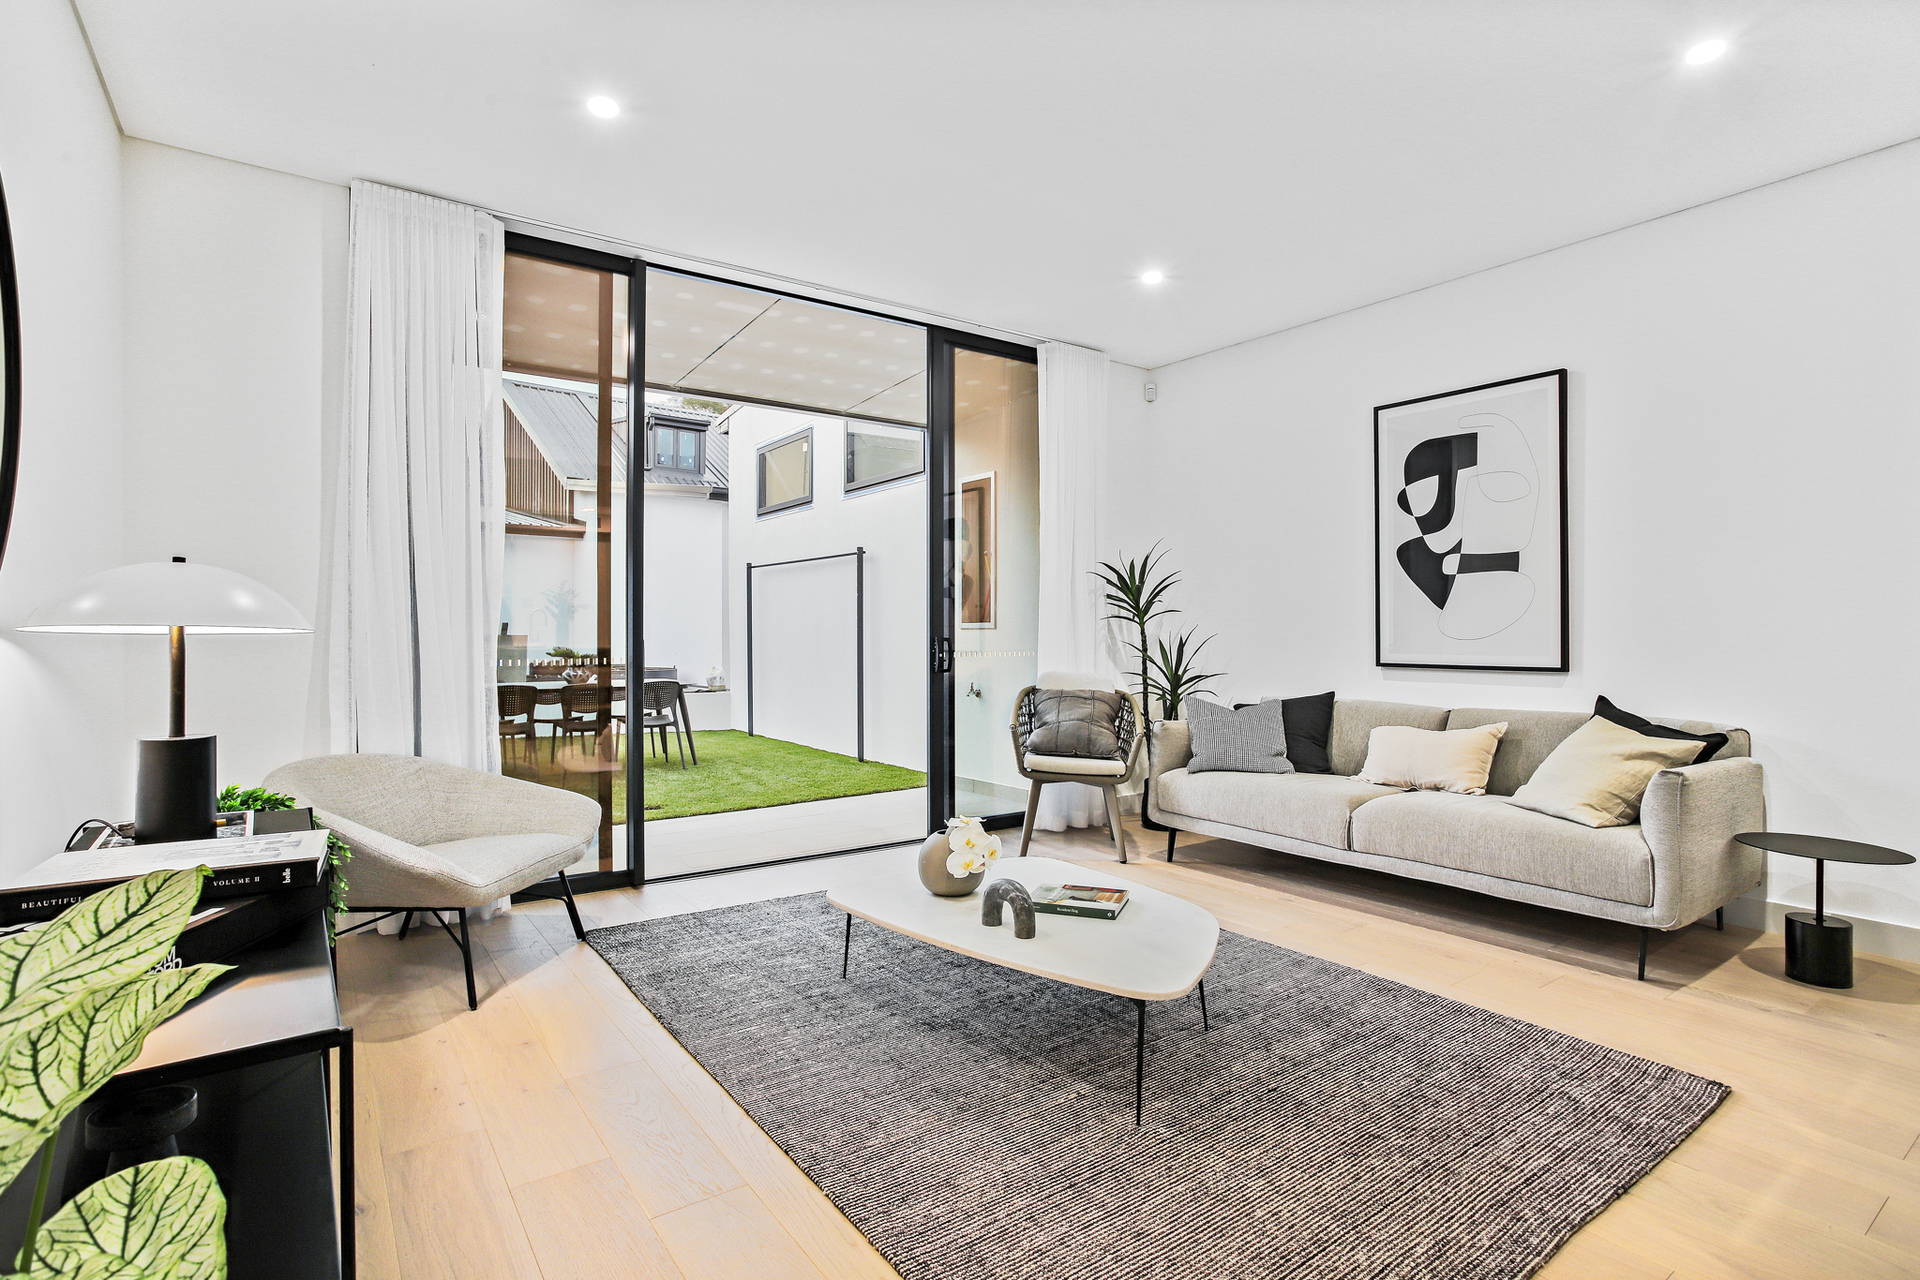 “Brand-New Masterpiece Contemporary living” IN THE HEART OF PARRAMATTA